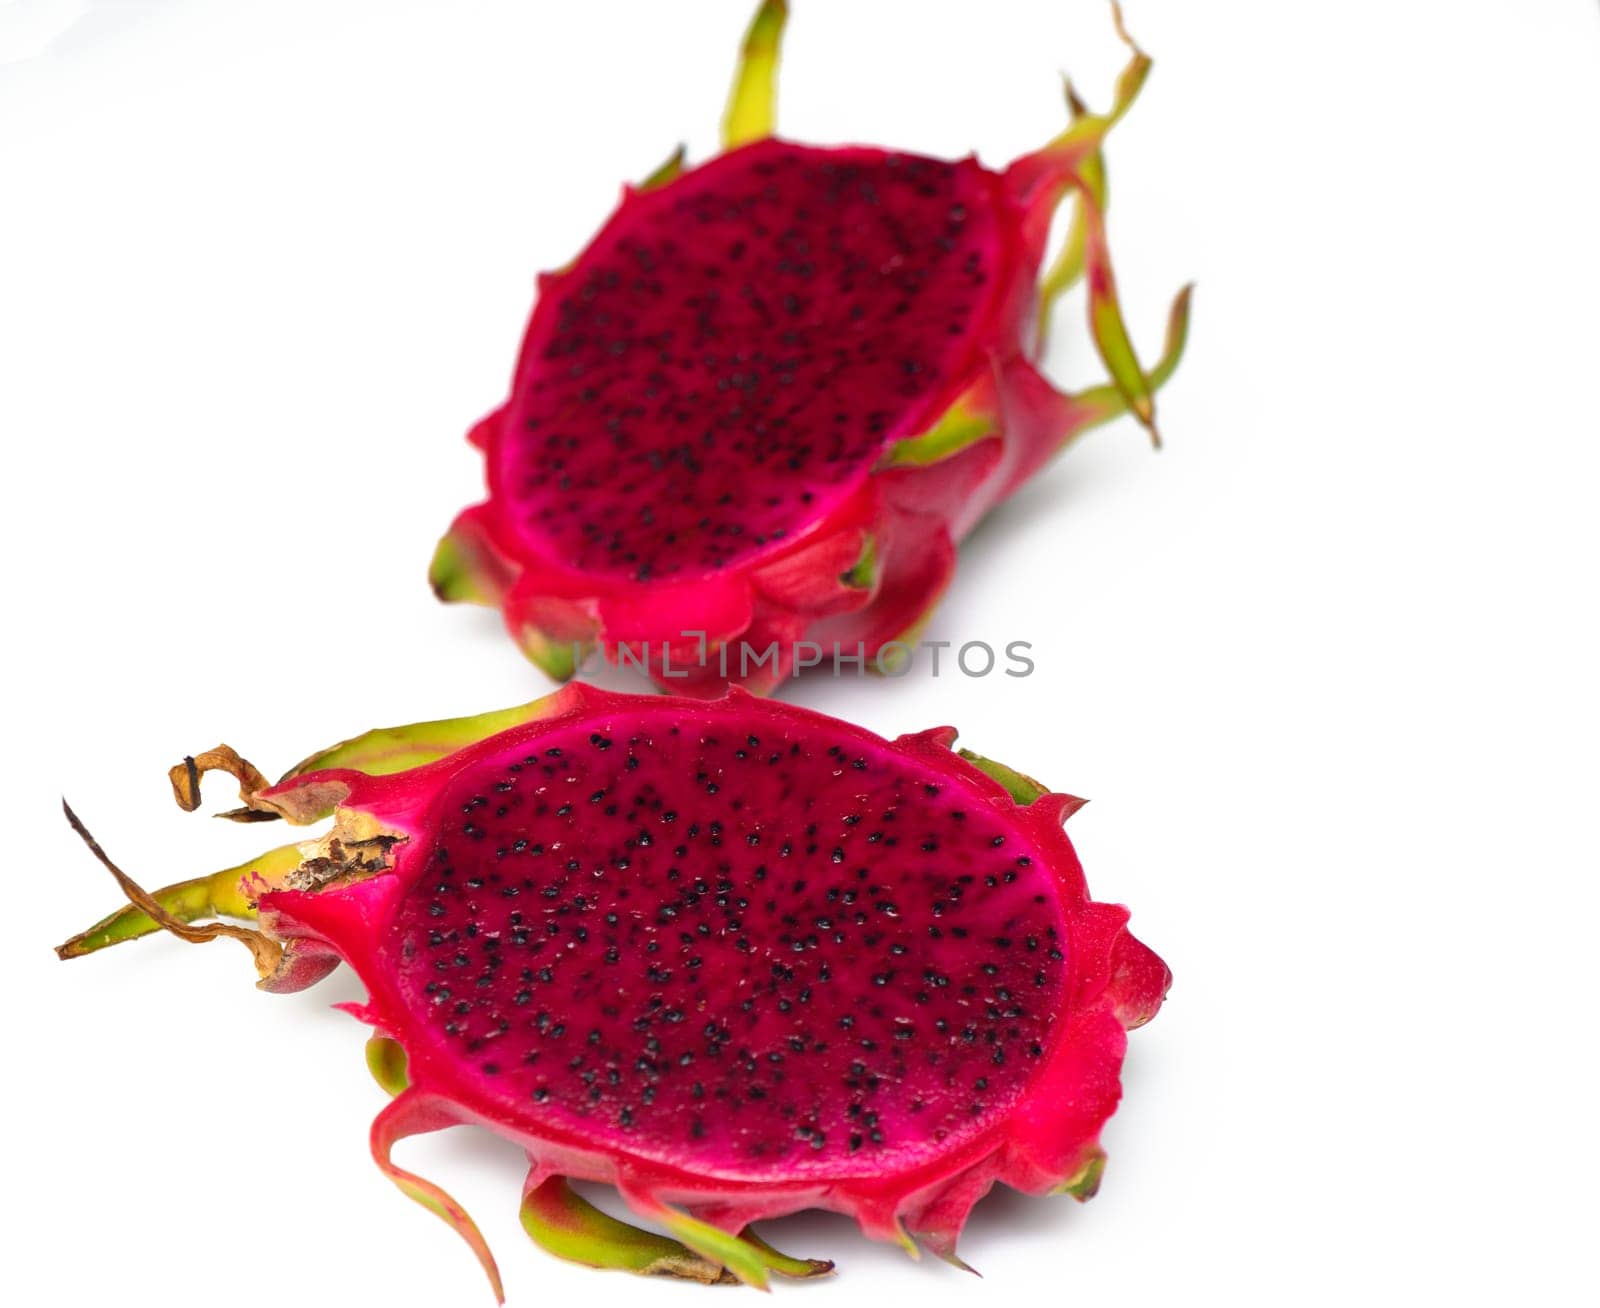 Delicious cut and whole dragon fruit (pitahaya) on white background 2